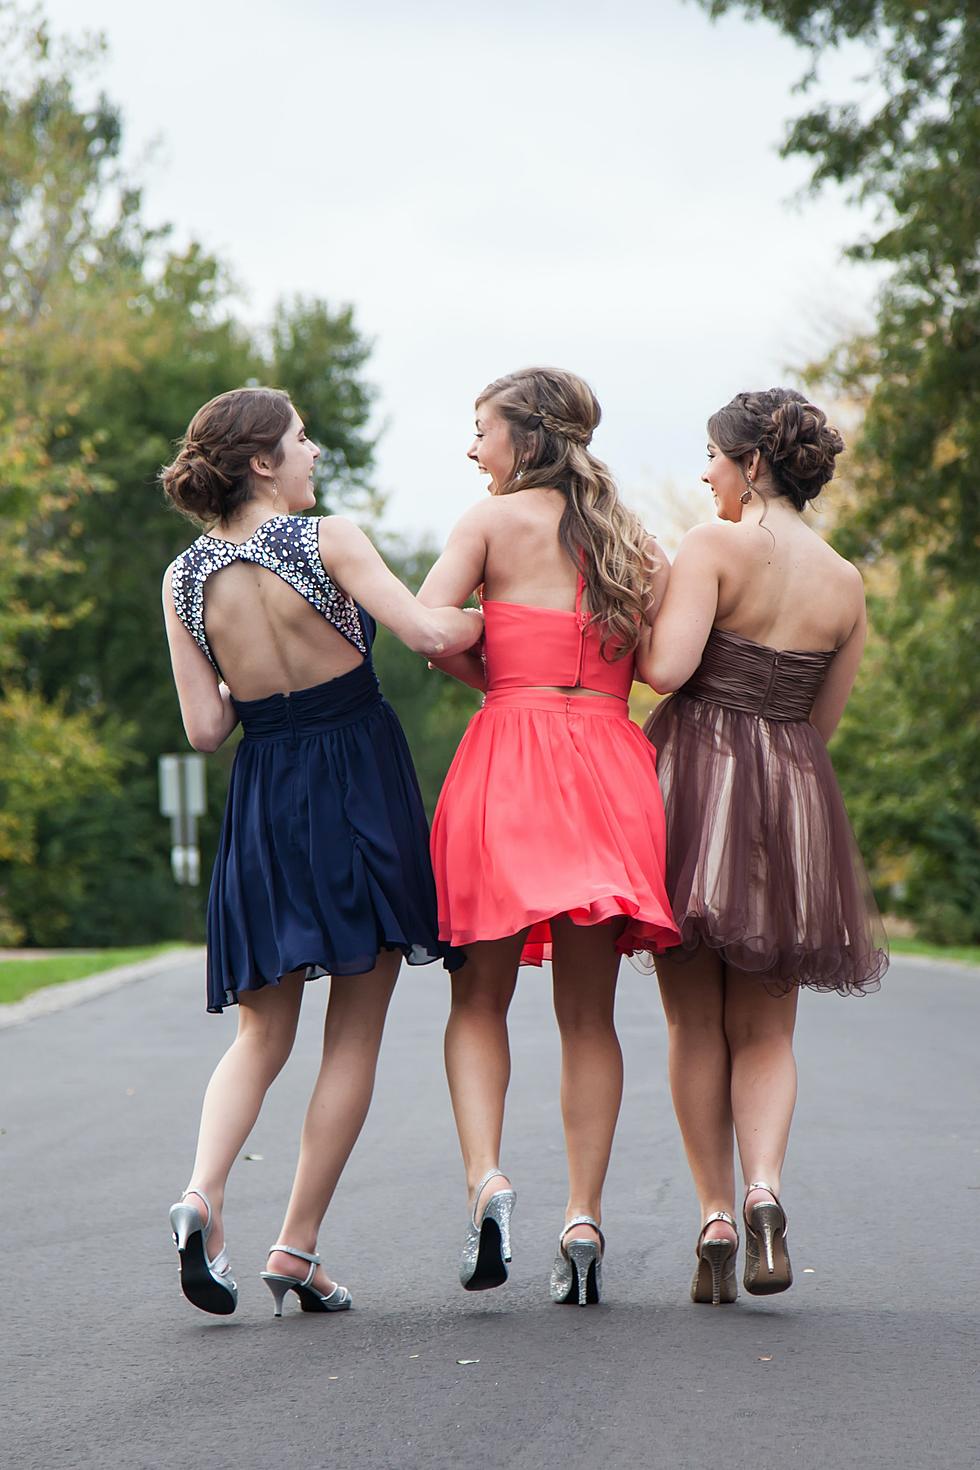 Young Mainers Receive Gorgeous Dresses for Prom at Belle of The Ball